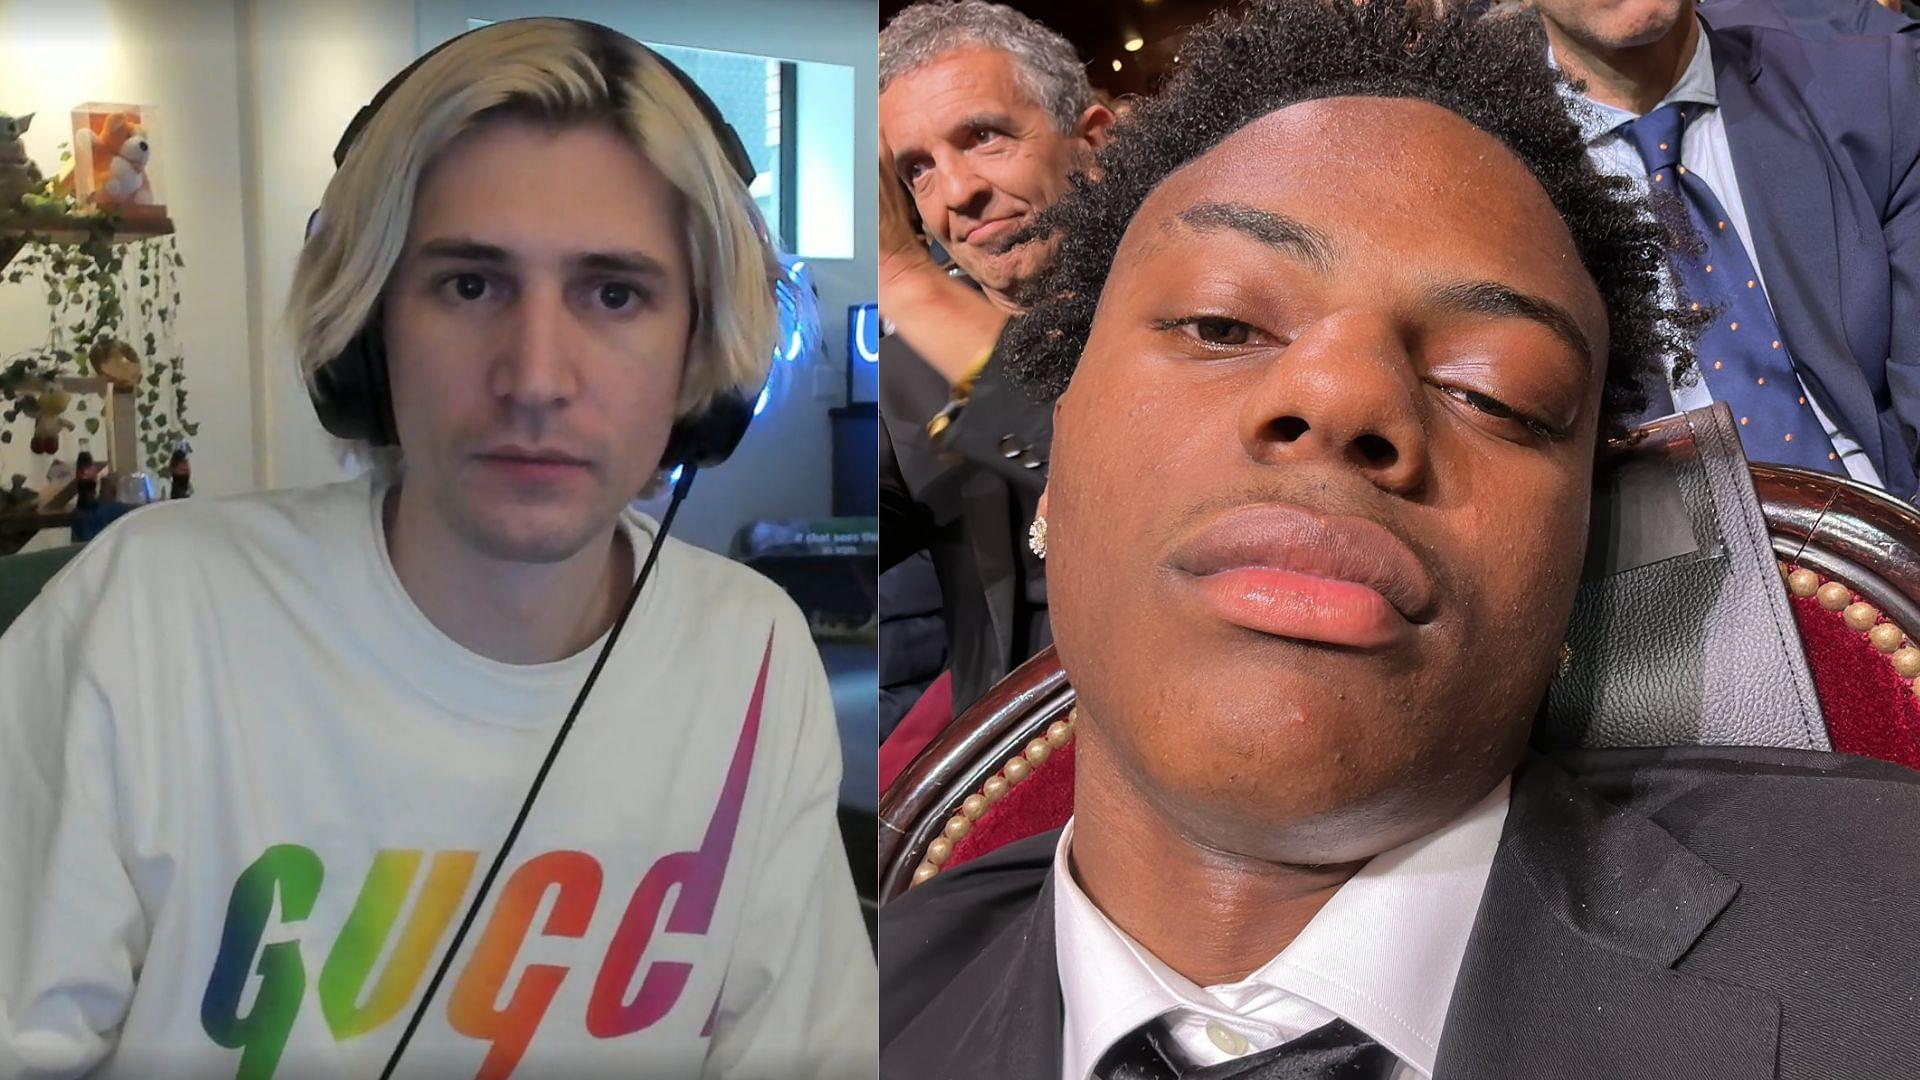 IShowSpeed and xQc Fortnite gaming collab turns out to be hilarious and one of the best